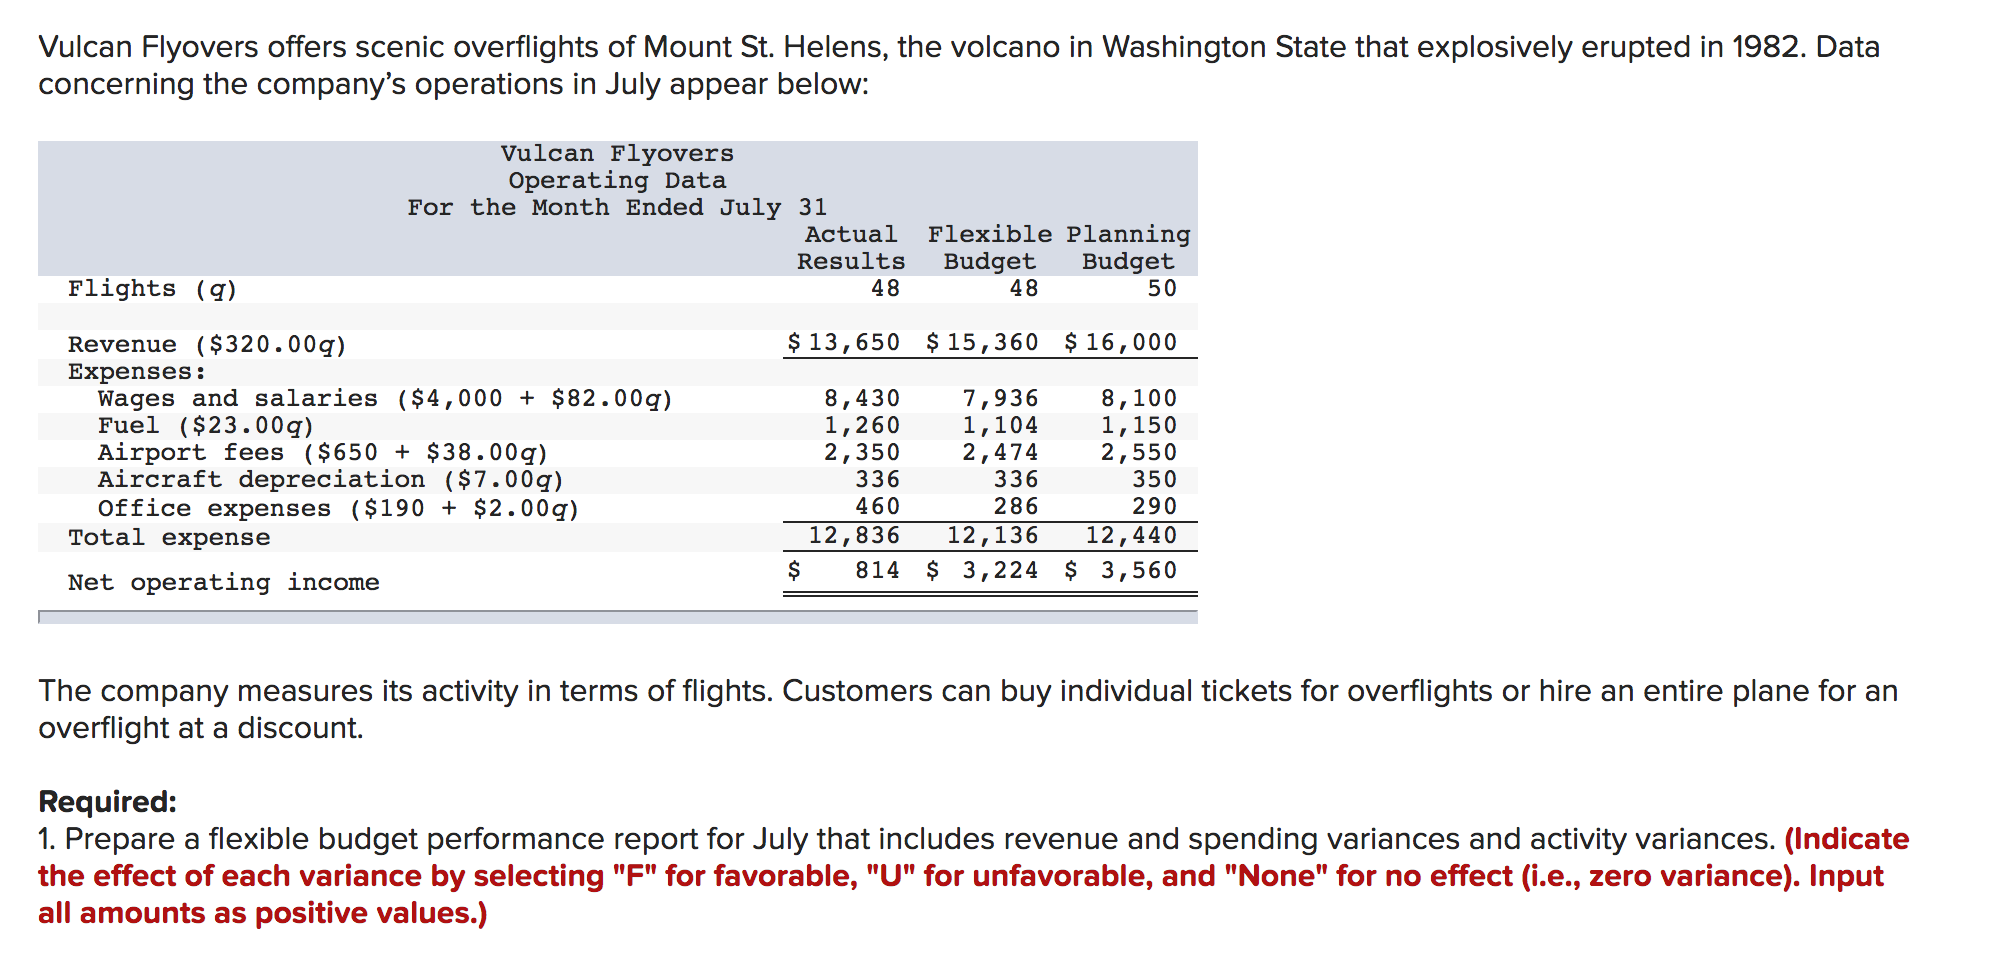 Vulcan Flyovers offers scenic overflights of Mount St. Helens, the volcano in Washington State that explosively erupted in 1982. Data
concerning the company's operations in July appear below:
Vulcan Flyovers
Operating Data
For the Month Ended July 31
Flexible Planning
Budget
50
Actual
Results
Budget
48
Flights (q)
48
$ 13,650 $15,360 $16, 000
Revenue ($320.00g)
Expenses:
Wages and salaries ($4,000 + $82.00g)
Fuel ($23.00g)
Airport fees ($650 + $38.00g)
Aircraft depreciation ($7.00g)
Office expenses ($190 + $2.00g)
Total expense
8,430
1,260
2,350
336
7,936
1,104
2,474
336
8,100
1,150
2,550
350
460
286
290
12,836
12,136
12,440
814
$ 3,224 $ 3,560
Net operating income
The company measures its activity in terms of flights. Customers can buy individual tickets for overflights or hire an entire plane for an
overflight at a discount.
Required:
1. Prepare a flexible budget performance report for July that includes revenue and spending variances and activity variances. (Indicate
the effect of each variance by selecting "F" for favorable, "U" for unfavorable, and "None" for no effect (i.e., zero variance). Input
all amounts as positive values.)
